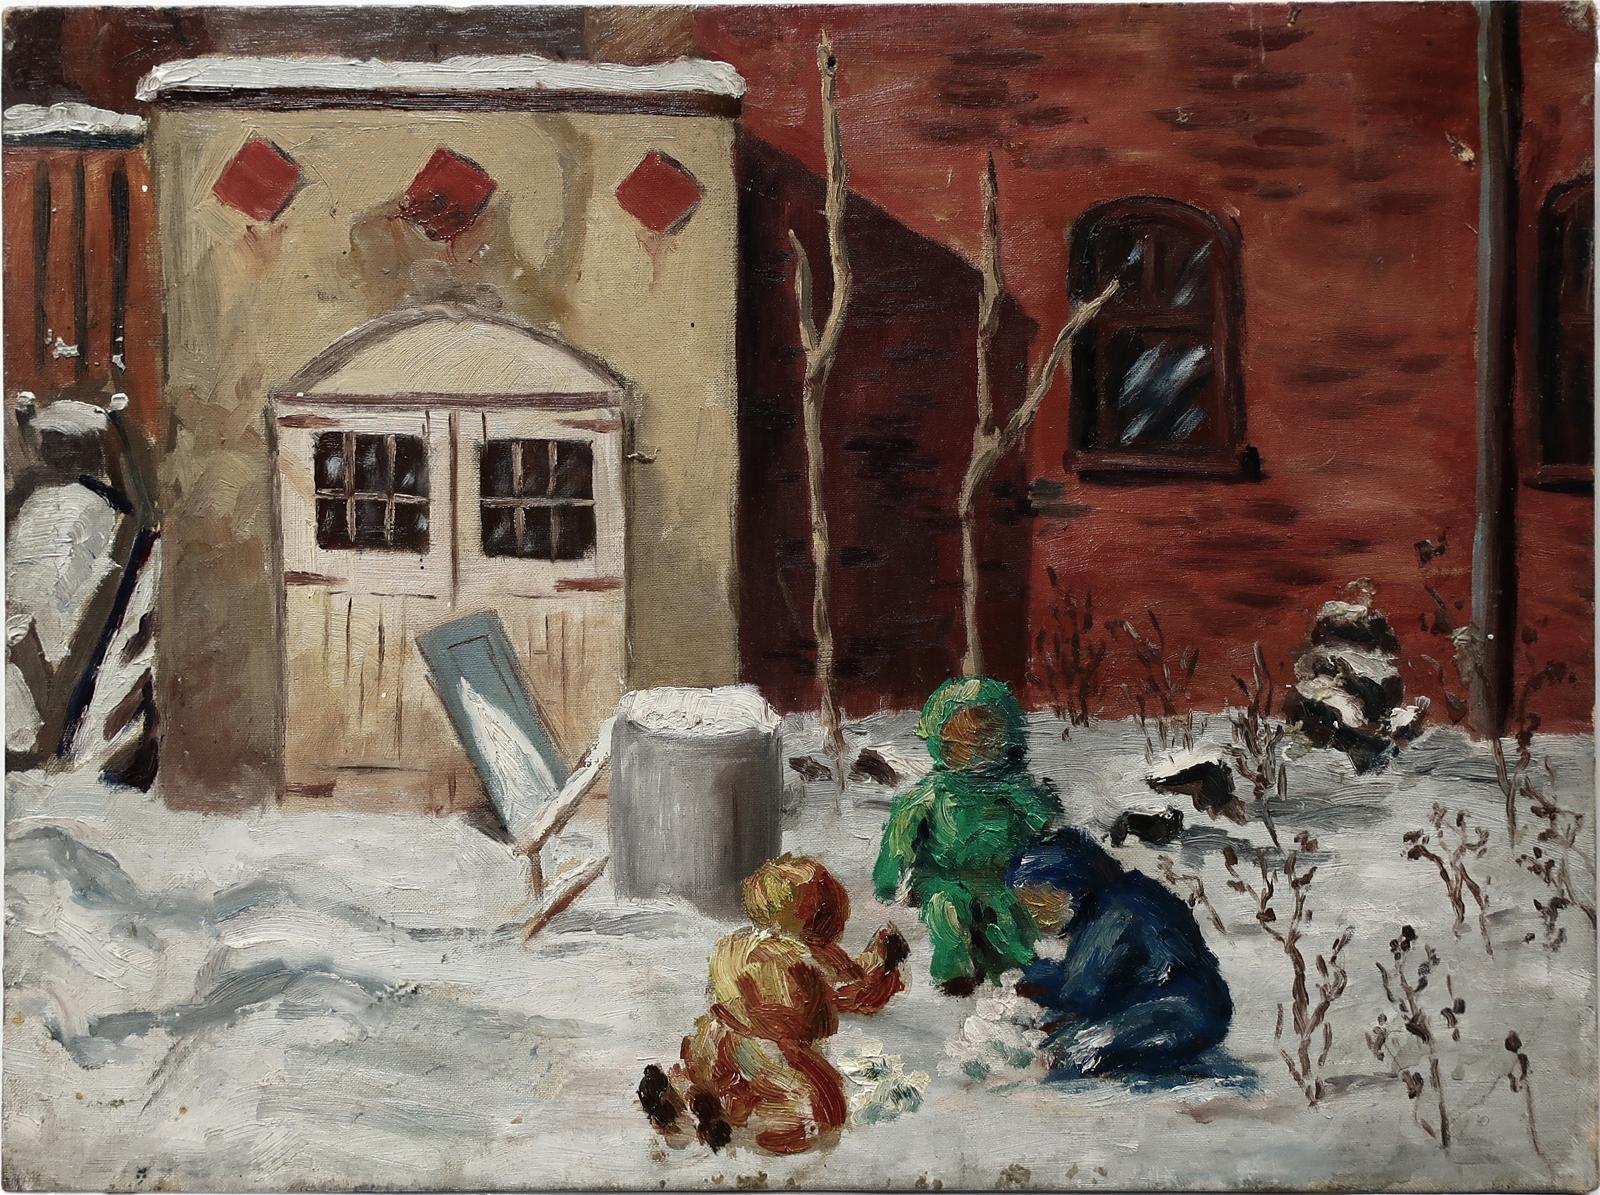 Arthur Lidstone (1903-1971) - Children Playing In The Snow